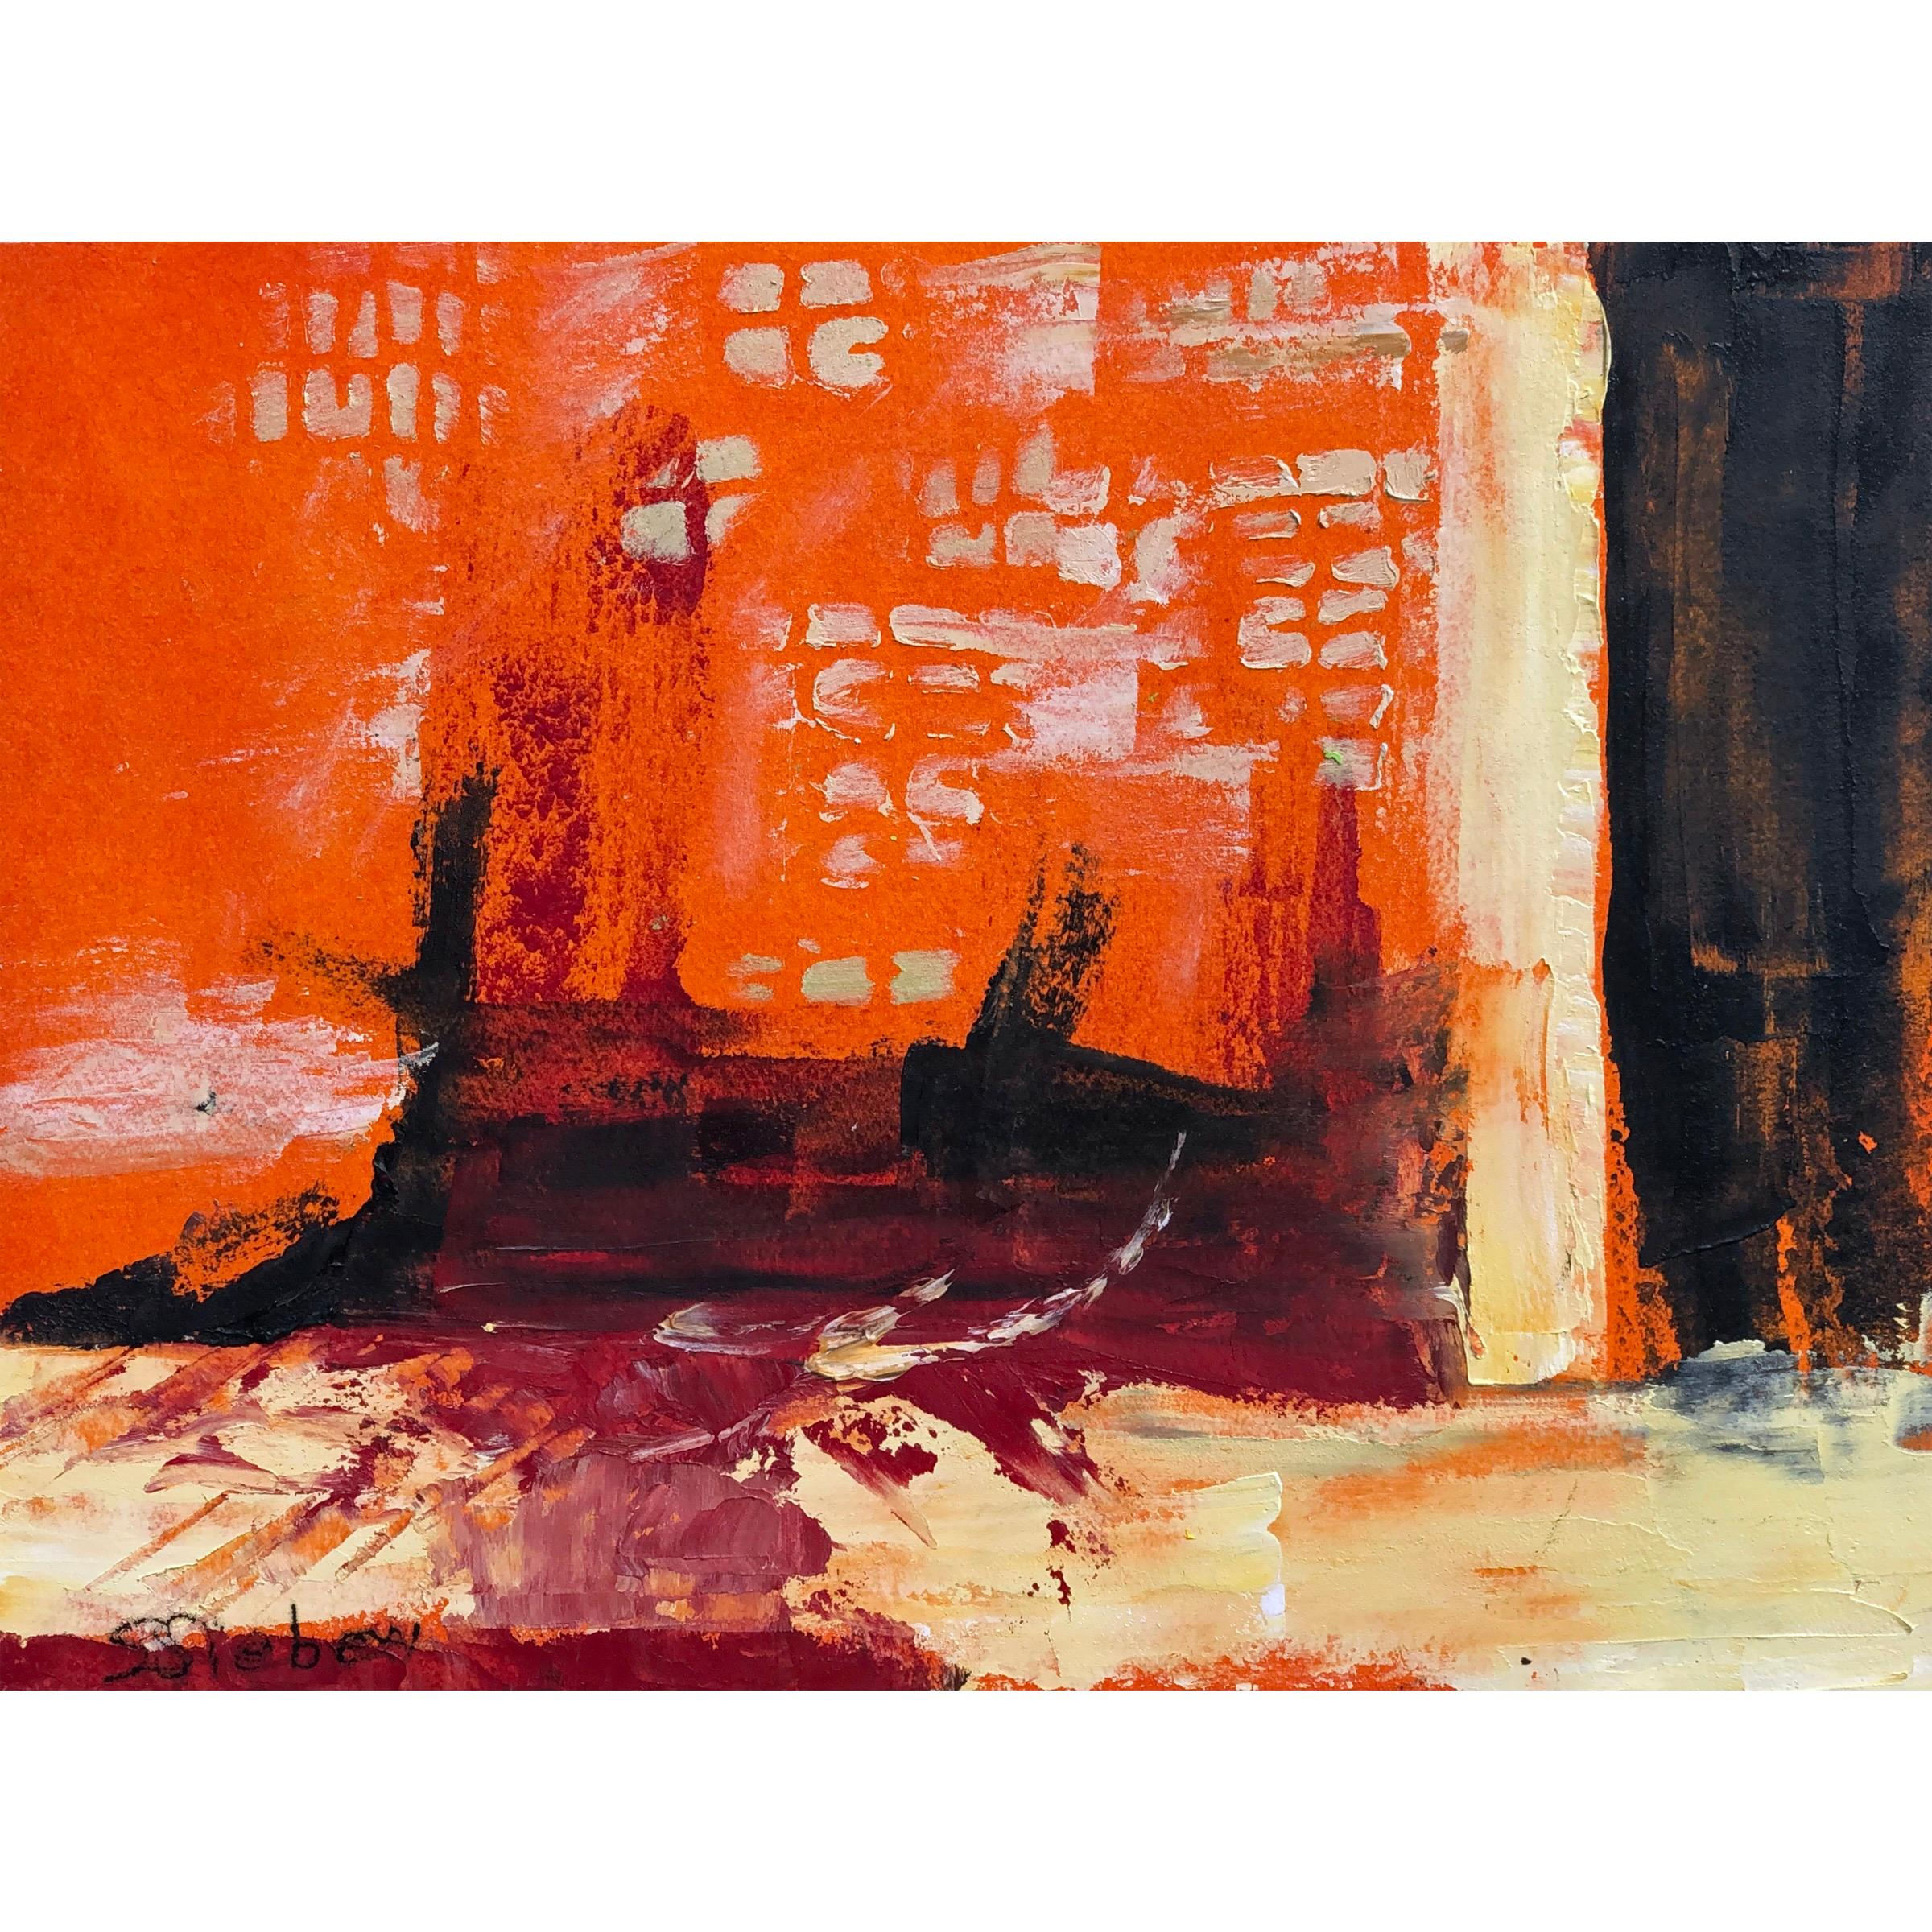 Fire In The Sky, Original Contemporary Orange Abstract Landscape Painting, 2021
12" x 16" x 1.5" (HxWxD) Oil on Wood Panel
Hand-signed by the artist.

An abstract expressionist landscape, this work packs a punch, despite its smaller size. A bold